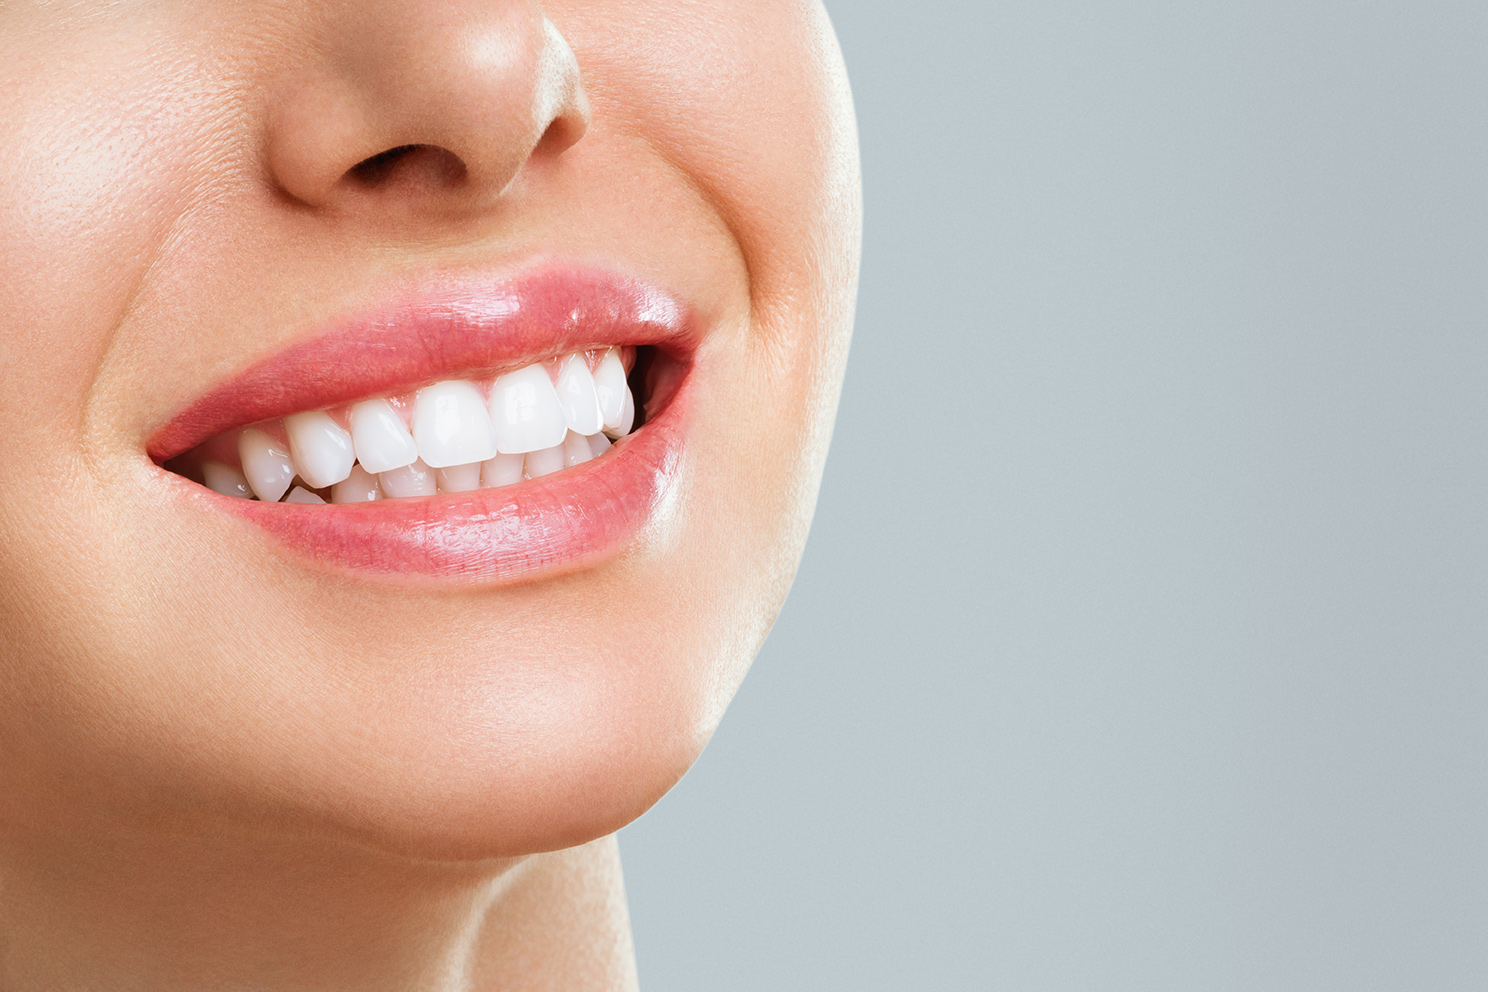 Perfect healthy teeth smile of a young woman